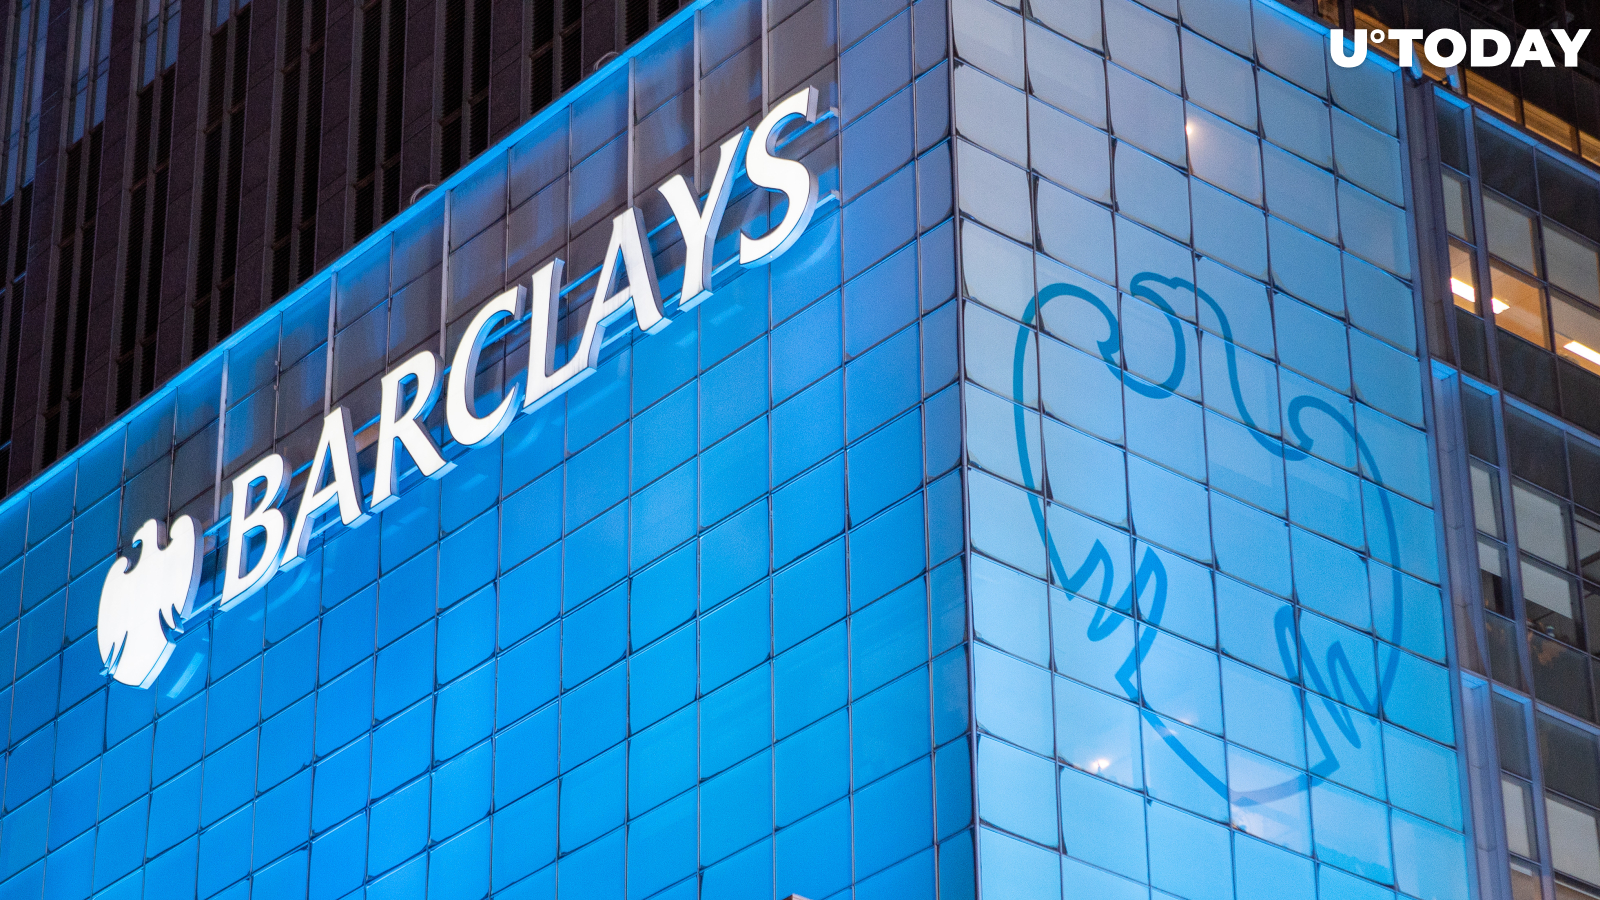 British Banking Giant Barclays Bans Payments to Binance, Citing FCA Notice